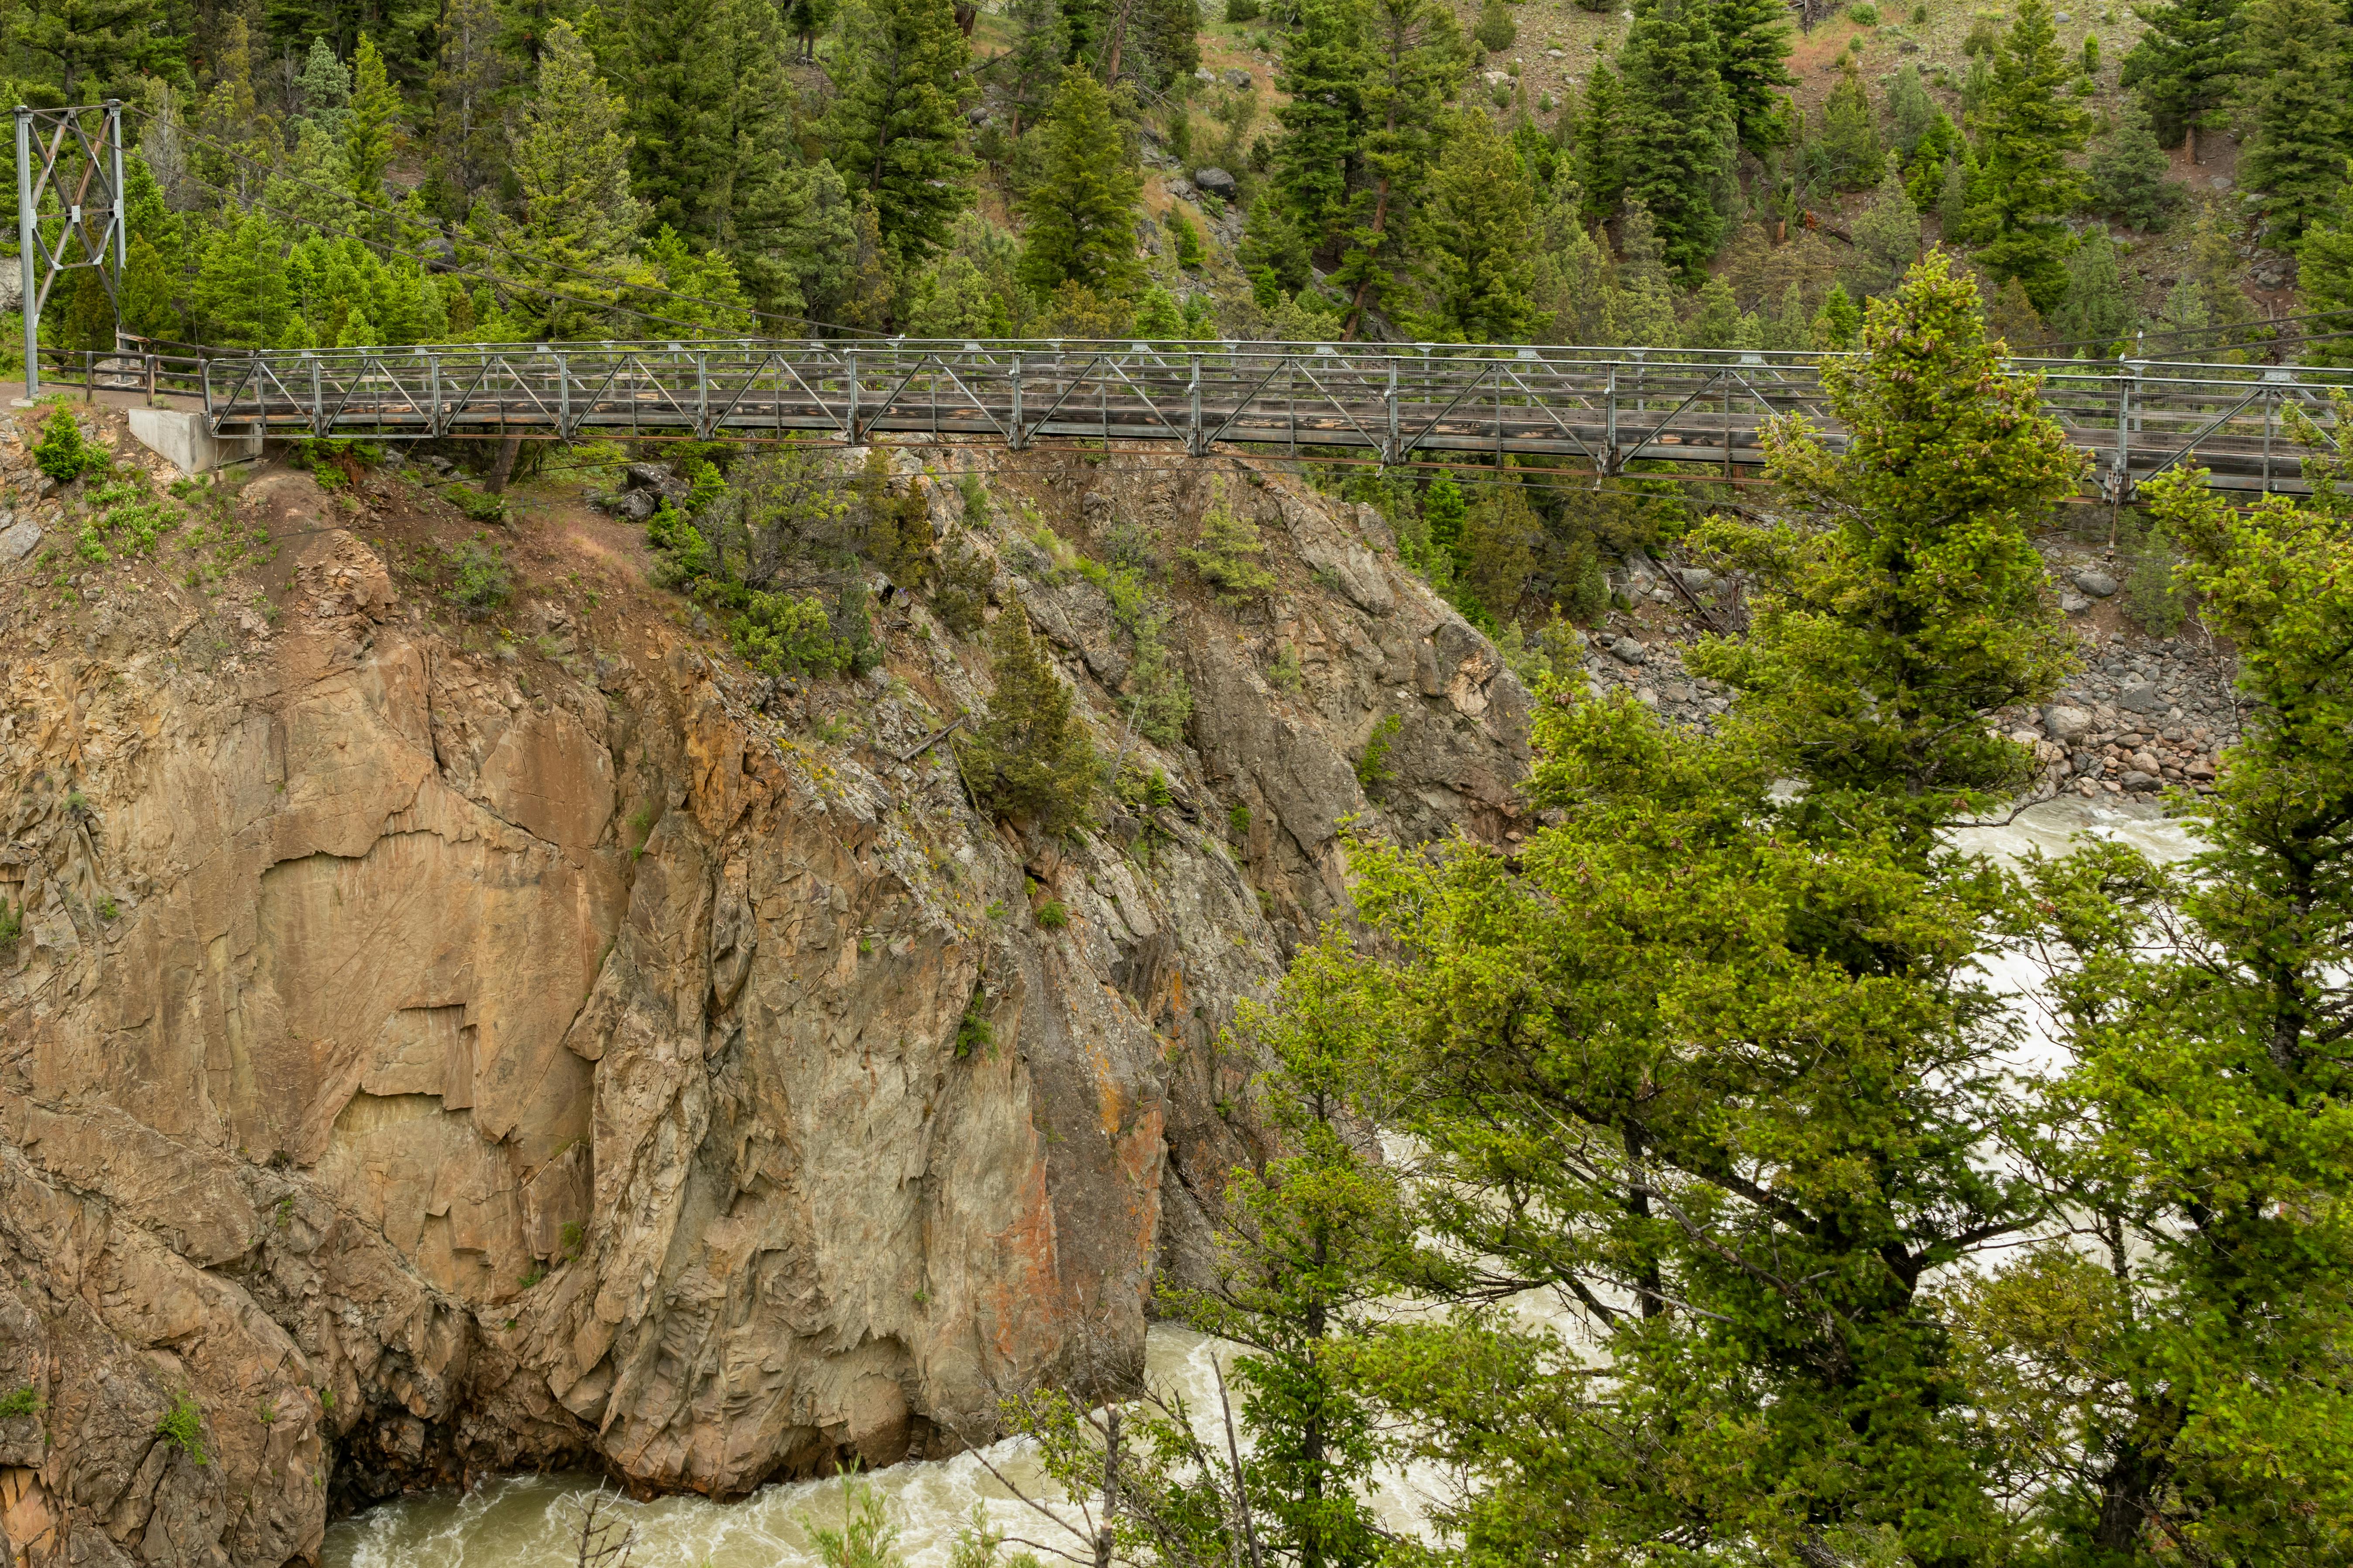 A view of the suspension bridge over Hellroaring Creek